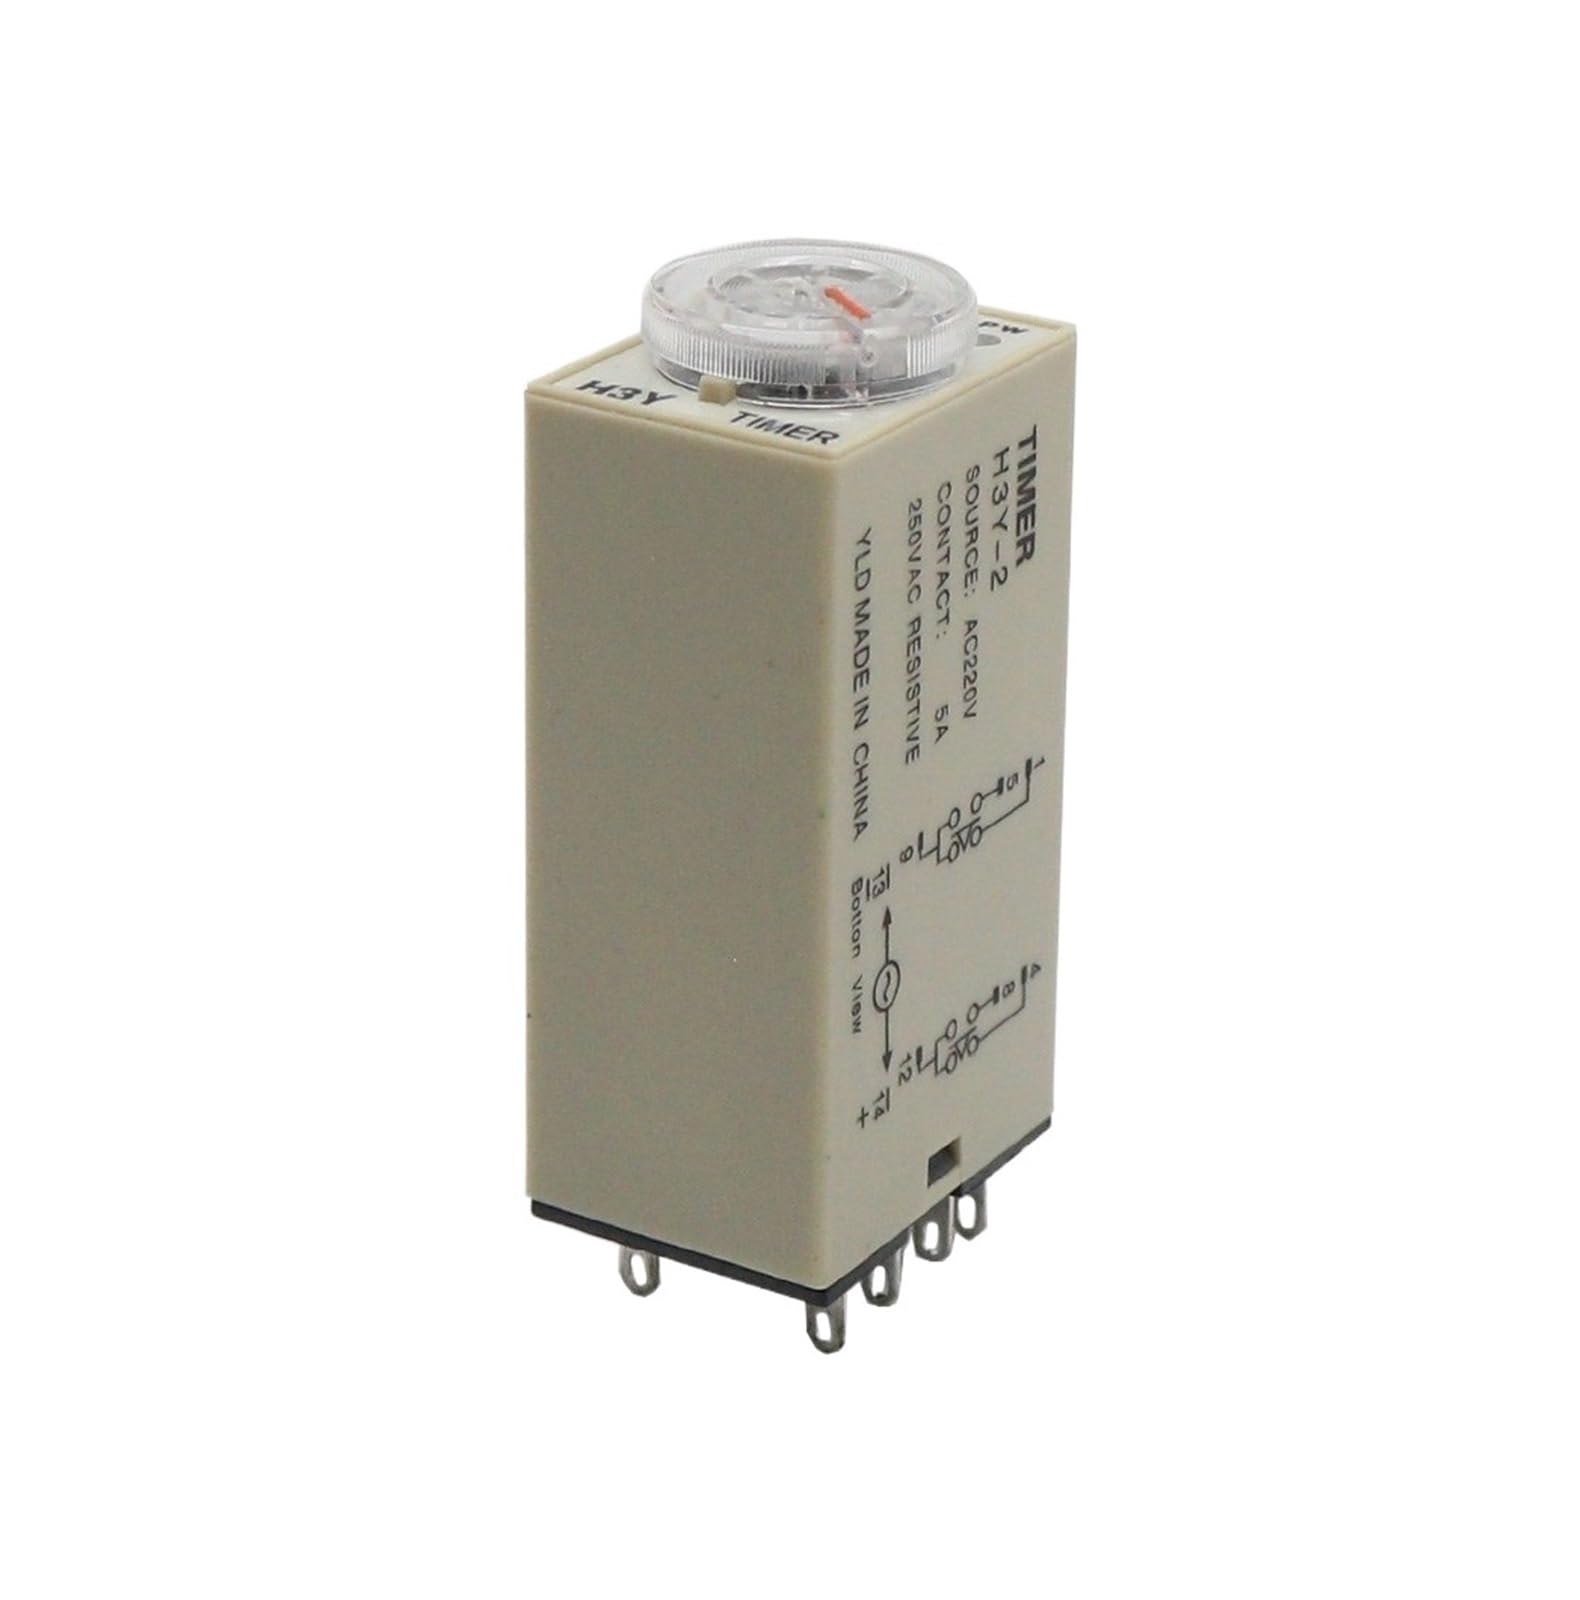 1pcs Power on Delay Time Relay H3Y-2 Small 8-pinDC12V24vAC220v Timer Switch 1S 3S 5S 30S 60S 5M 10M 30M 60M LABDIP(DC 12V,H3Y-2 10Minute) von LABDIP